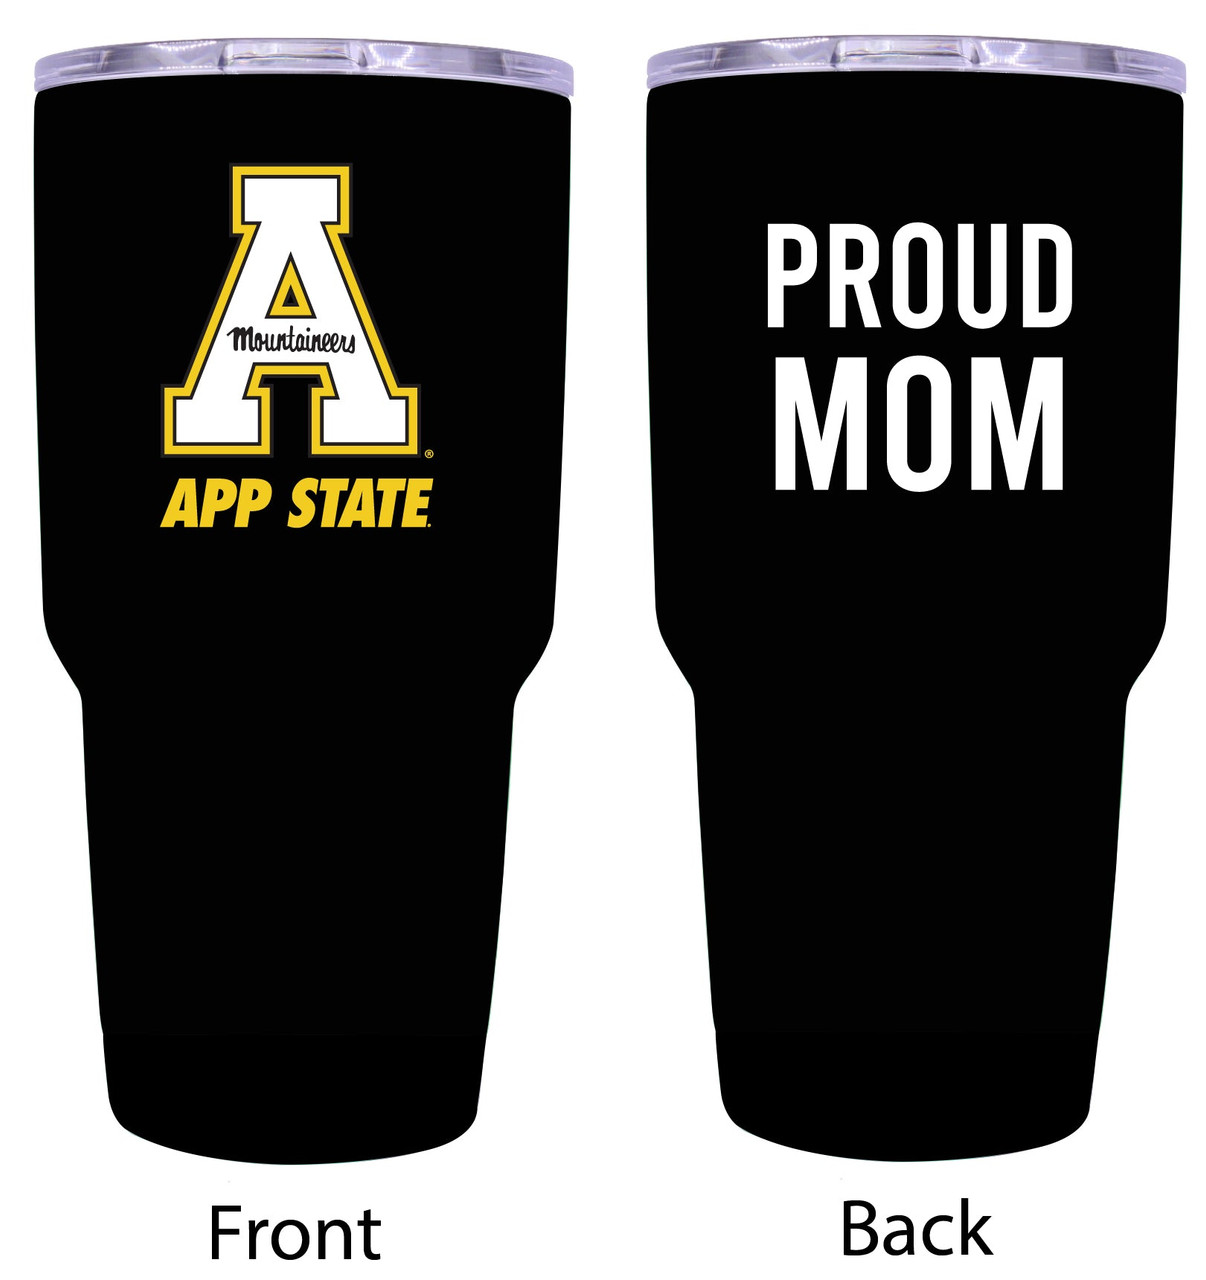 Appalachian State Proud Mom 24 oz Insulated Stainless Steel Tumblers Choose Your Color.